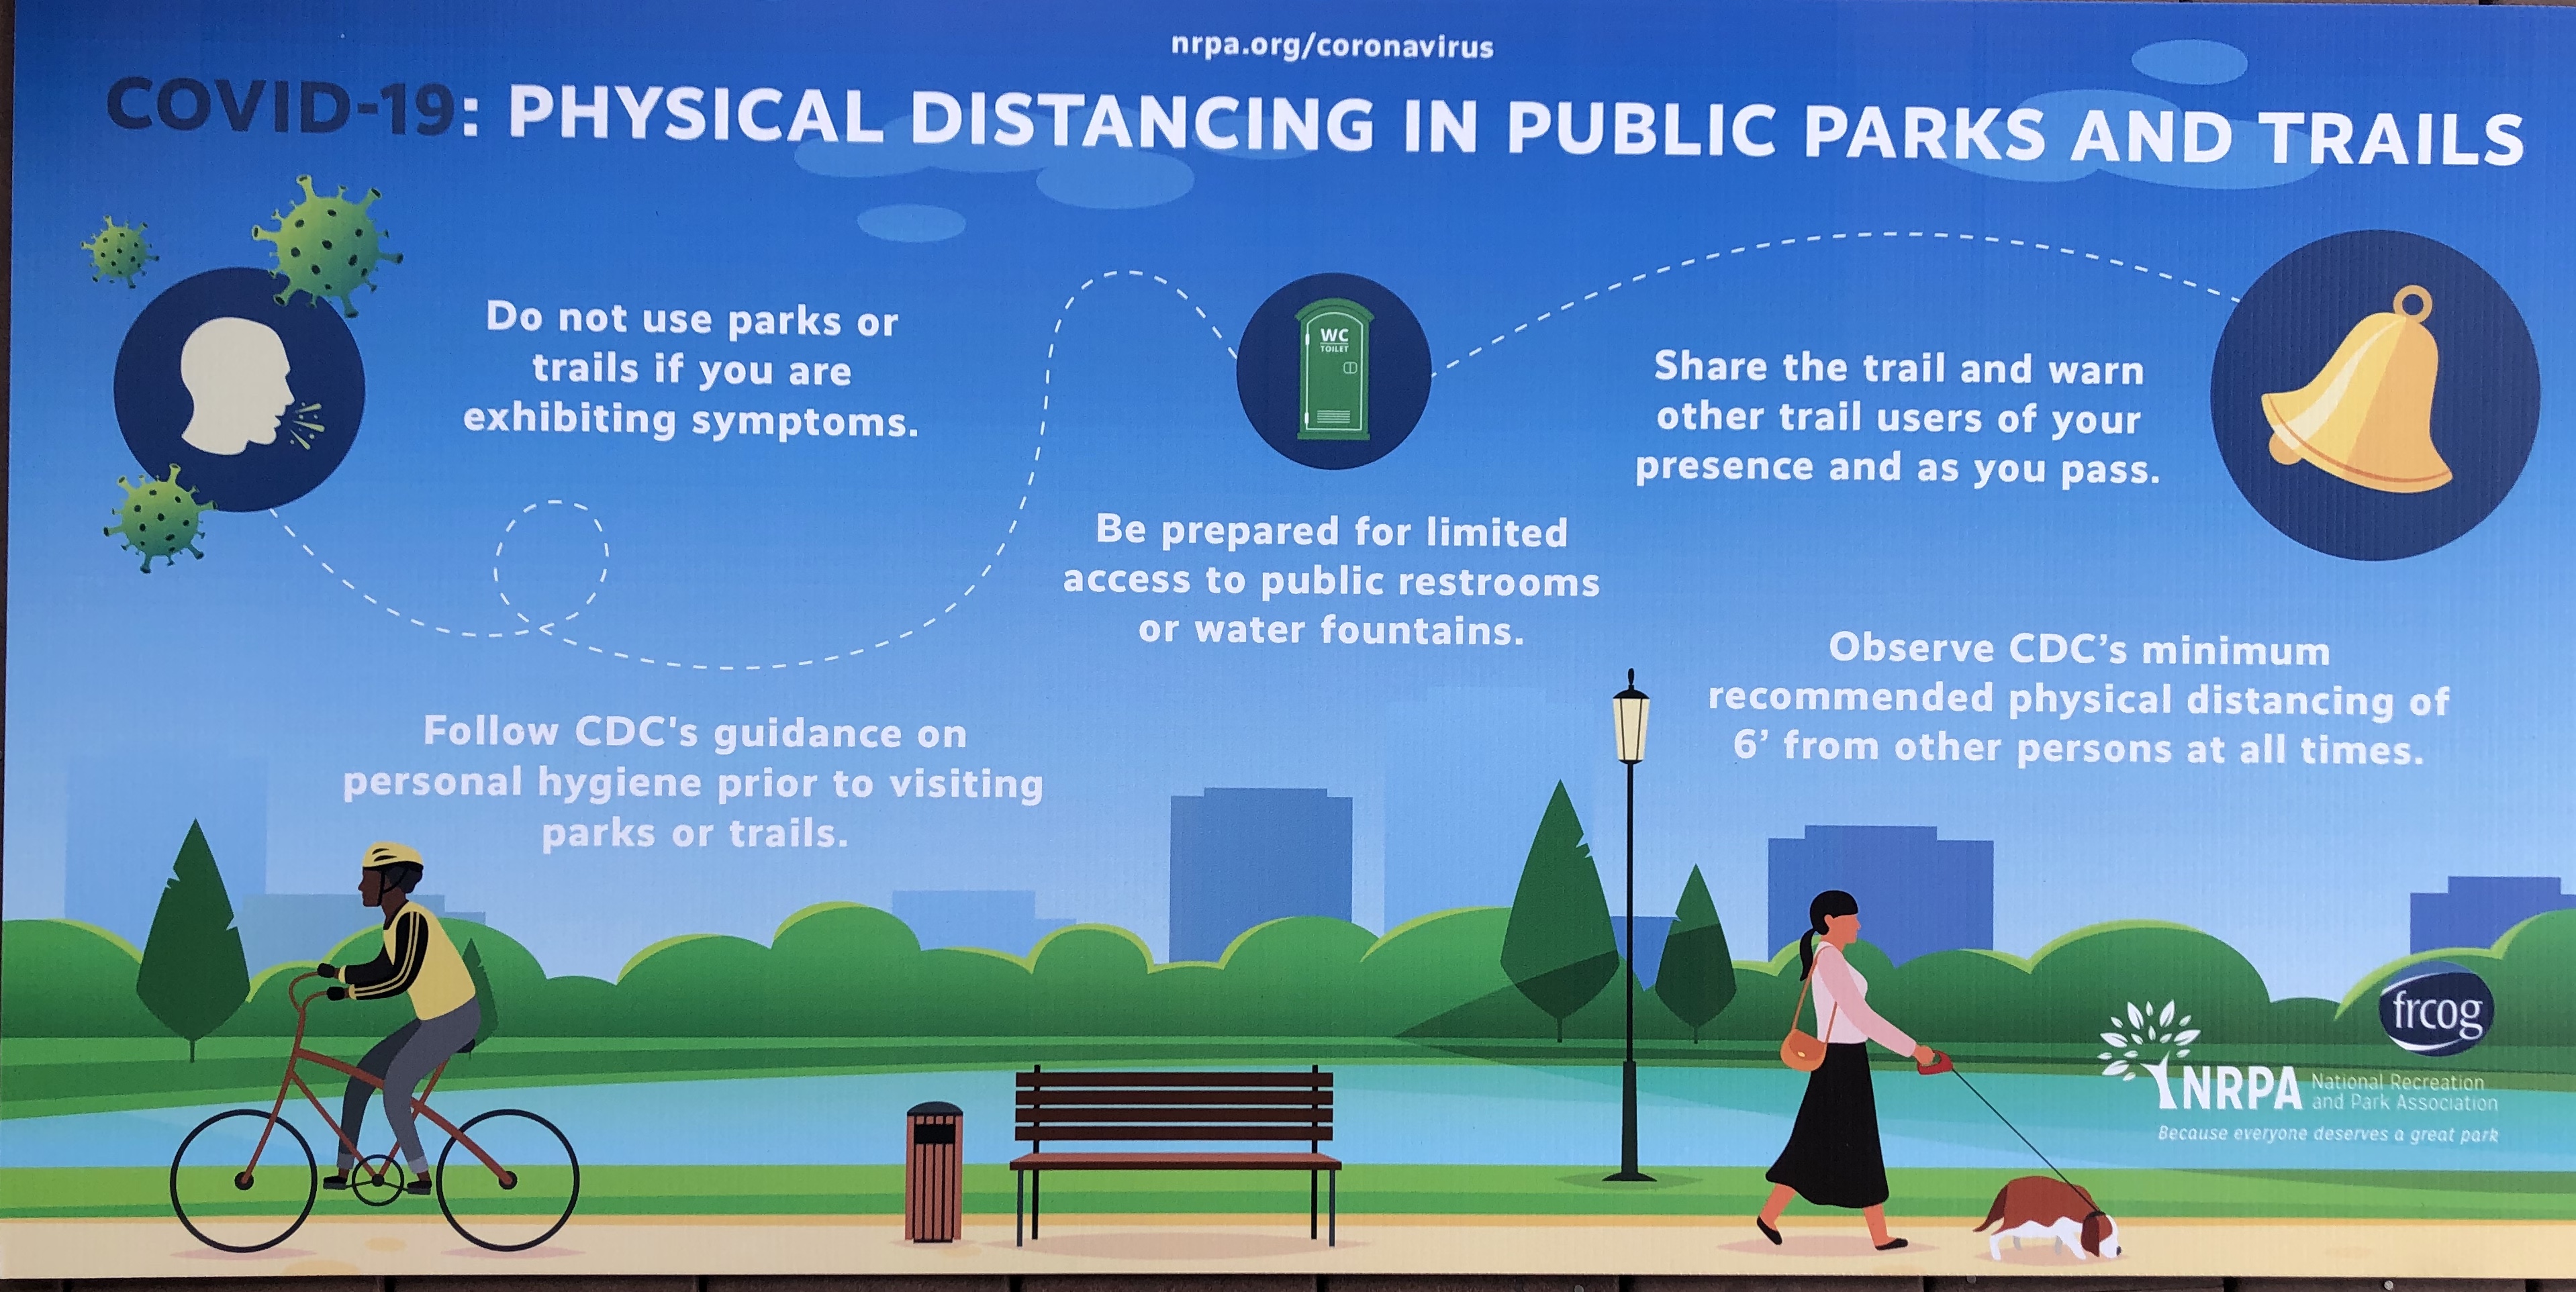 COVID-19: PHYSICAL DISTANCING IN PUBLIC PARKS AND TRAILS SIGN